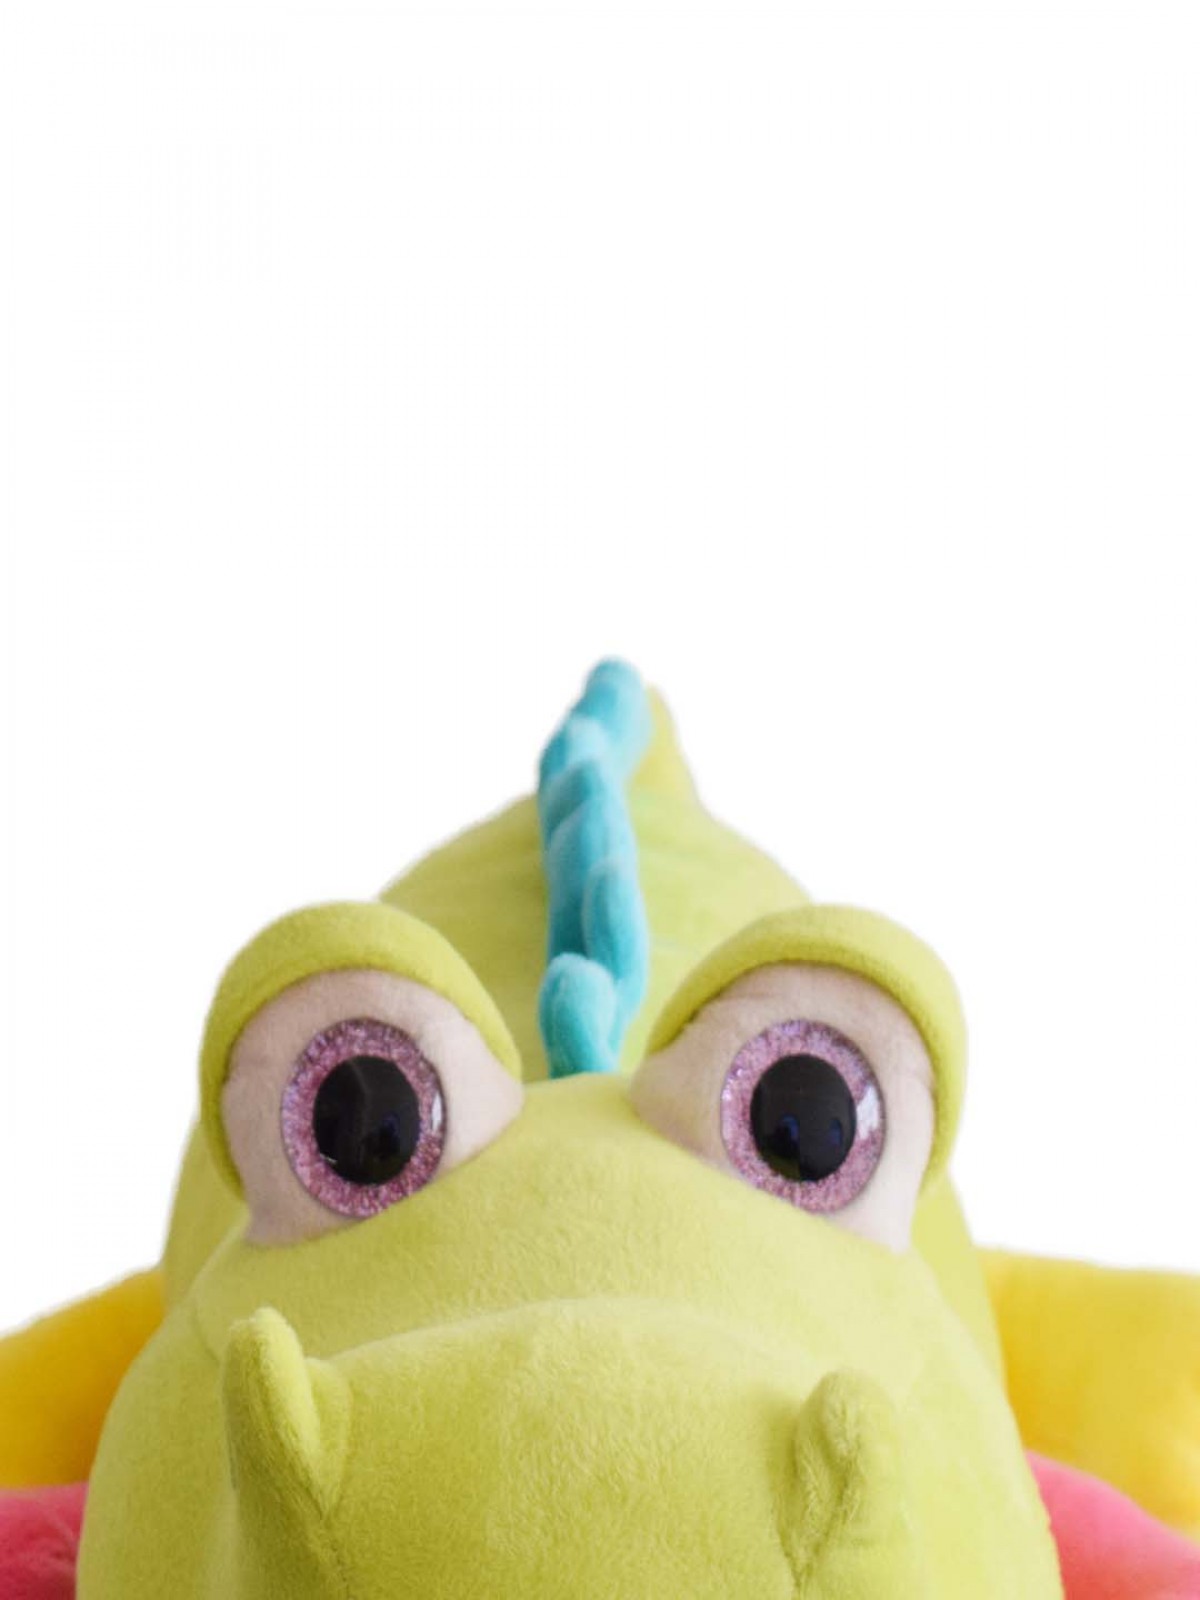 Adorable Stuffed Plush Crocodile With Glitter Eyes By Mirada, Soft Toys For Kids Of All Ages, 3Y+, Blue, 60Cm